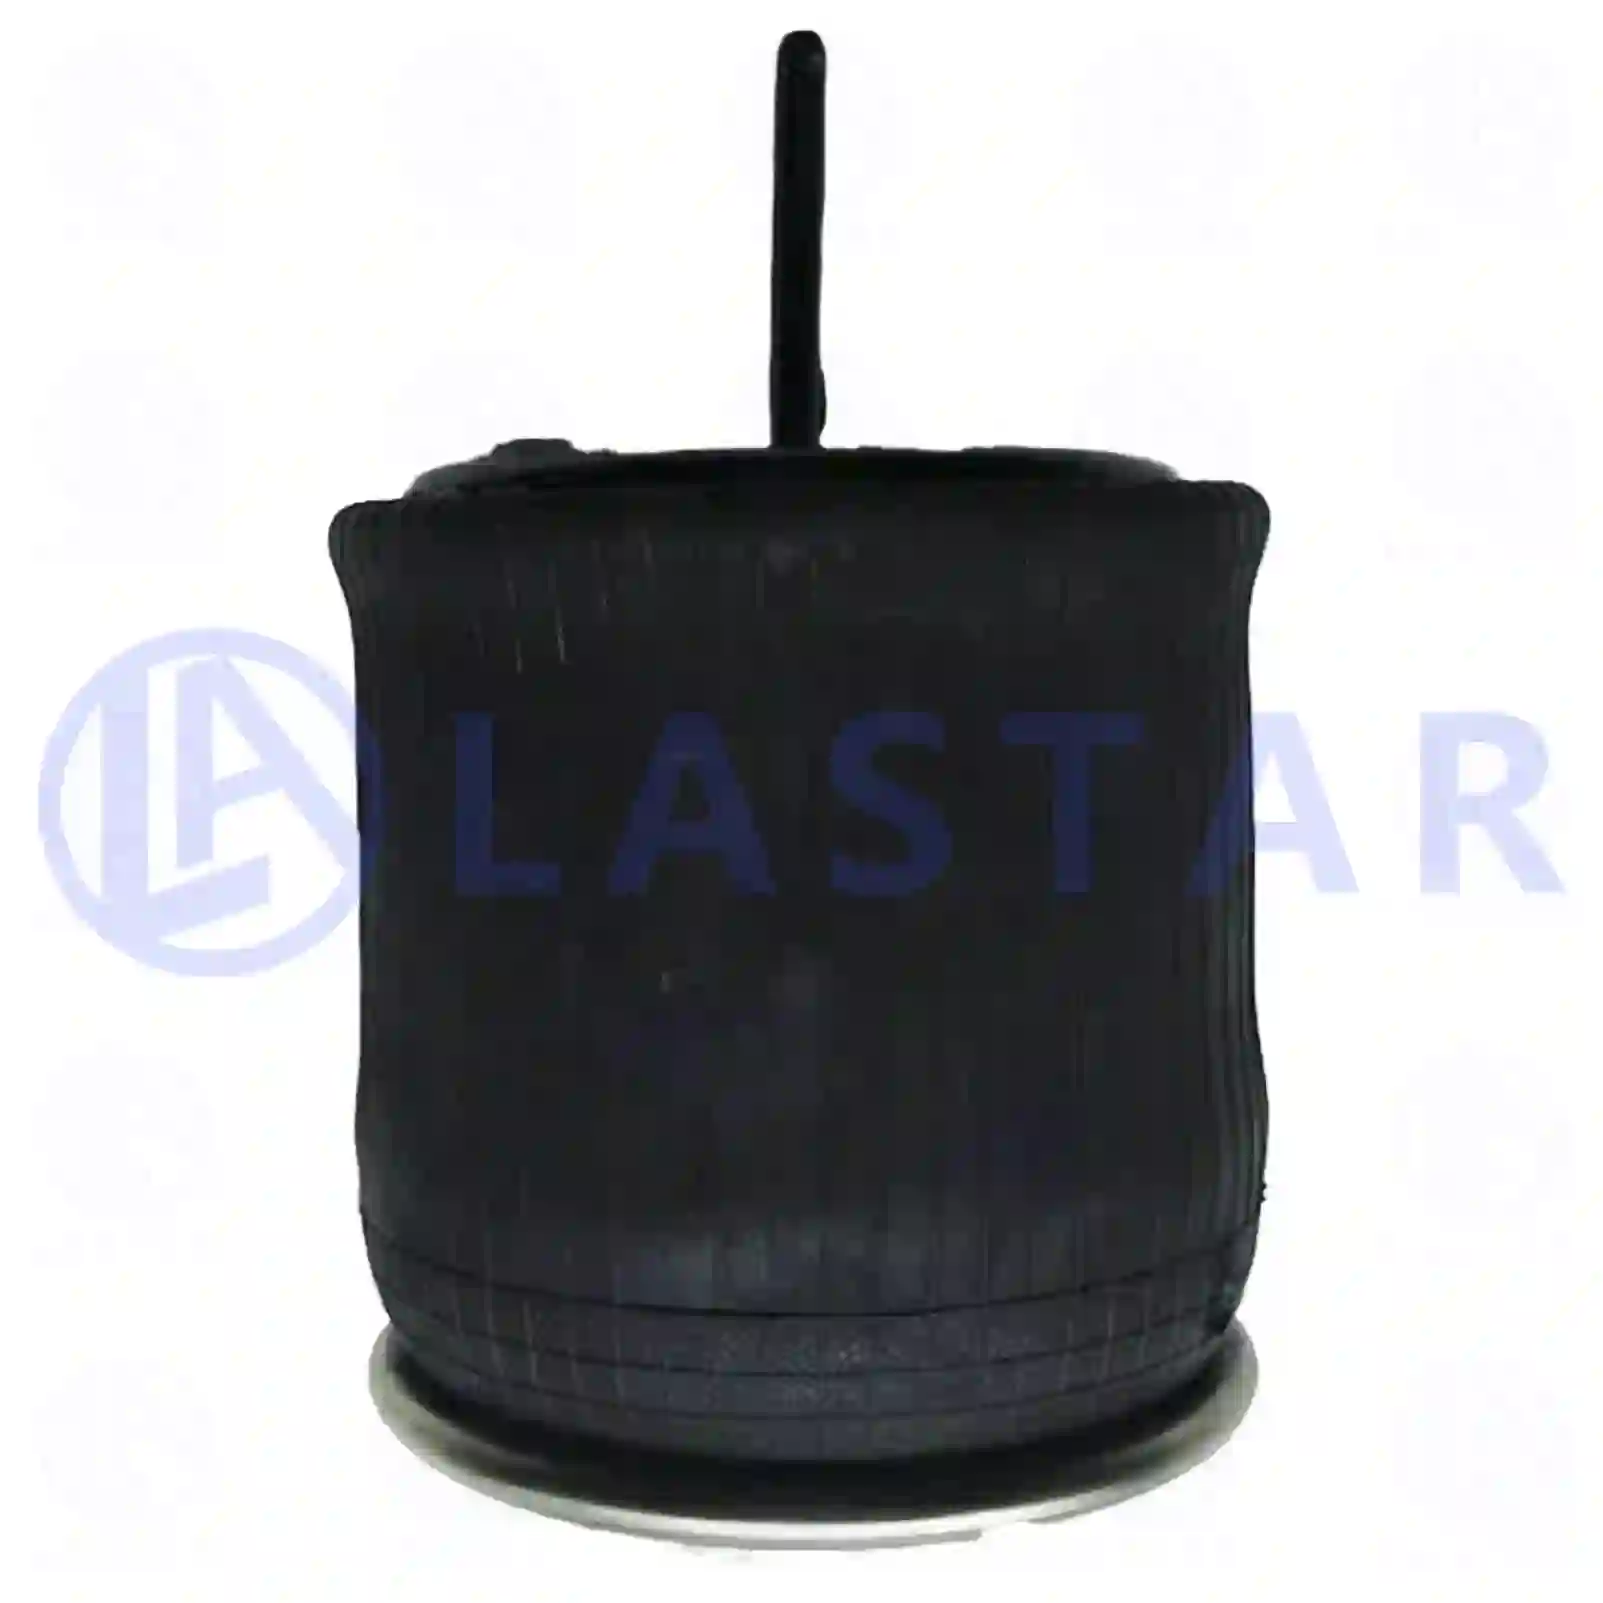 Air spring, with steel piston, 77730143, 2024287, 2024290, , ||  77730143 Lastar Spare Part | Truck Spare Parts, Auotomotive Spare Parts Air spring, with steel piston, 77730143, 2024287, 2024290, , ||  77730143 Lastar Spare Part | Truck Spare Parts, Auotomotive Spare Parts